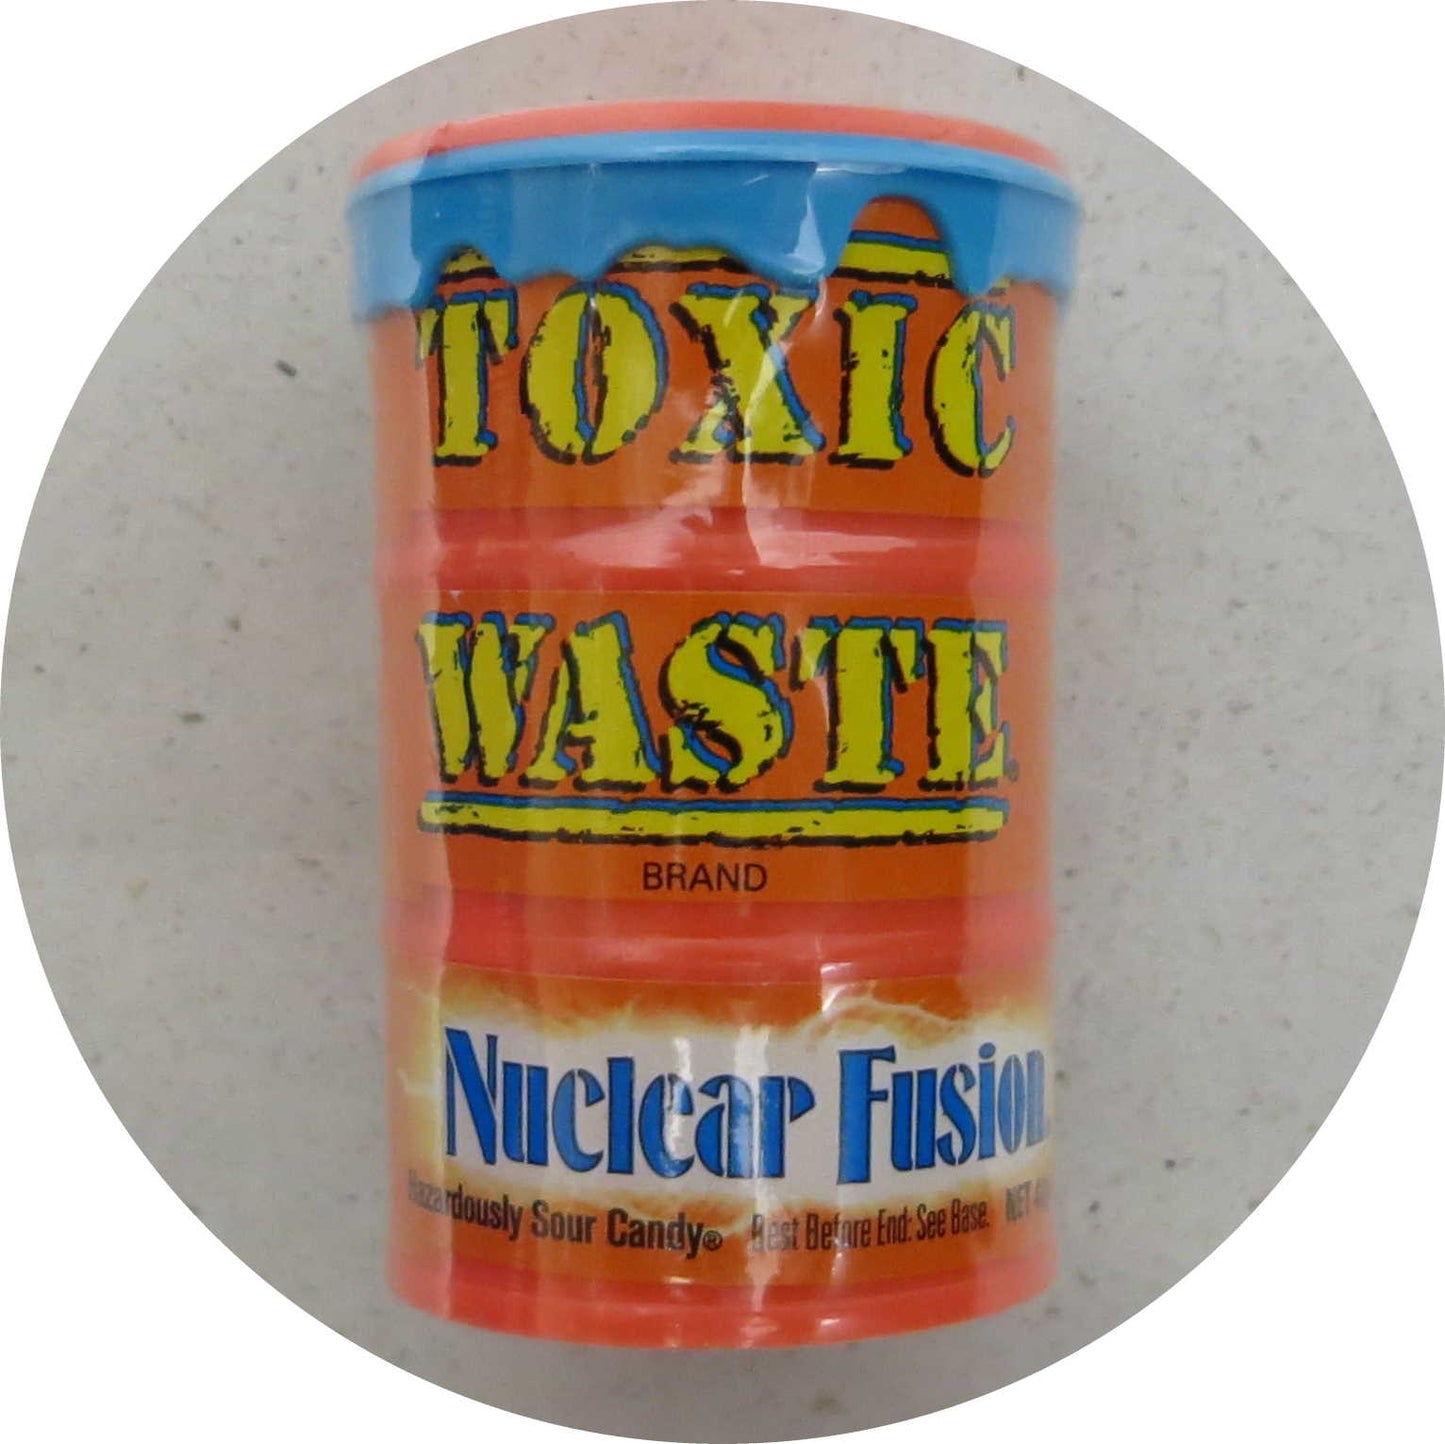 Toxic Waste Nuclear Fusion Sour Candy 42g